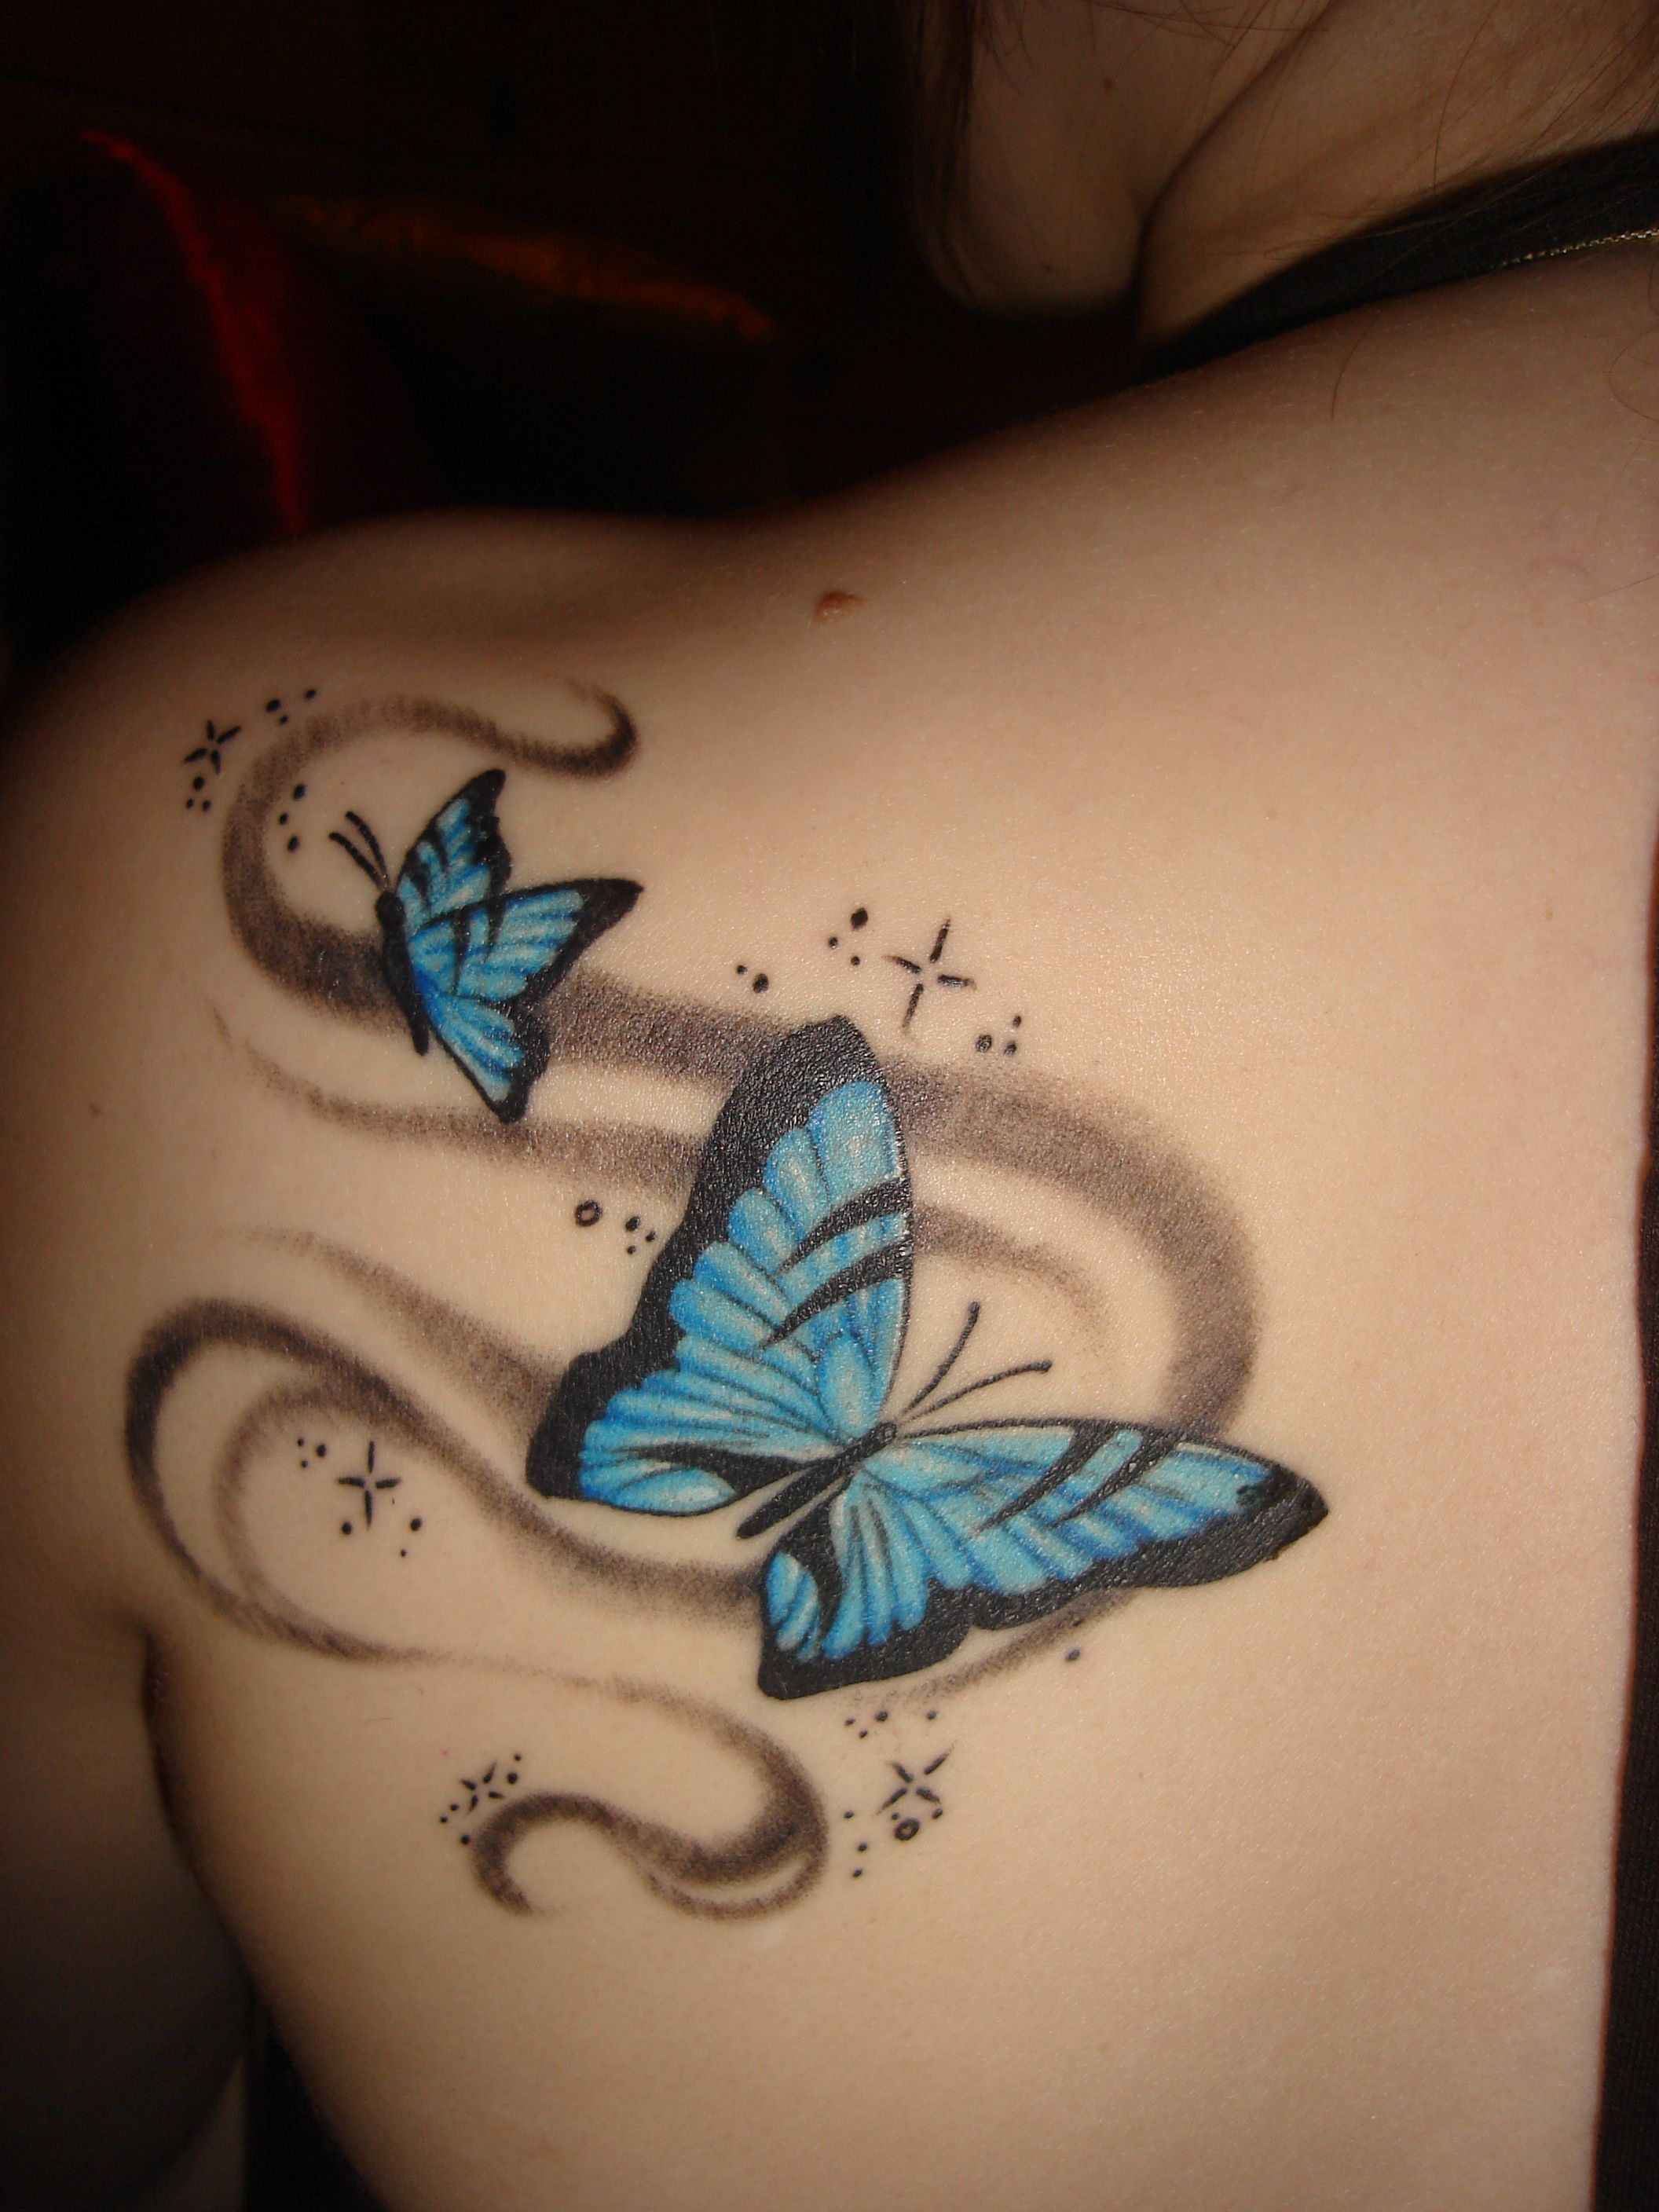 Butterfly Tattoo Meanings And Design Ideas Bad Ink Ideas Tattoos for dimensions 2112 X 2816